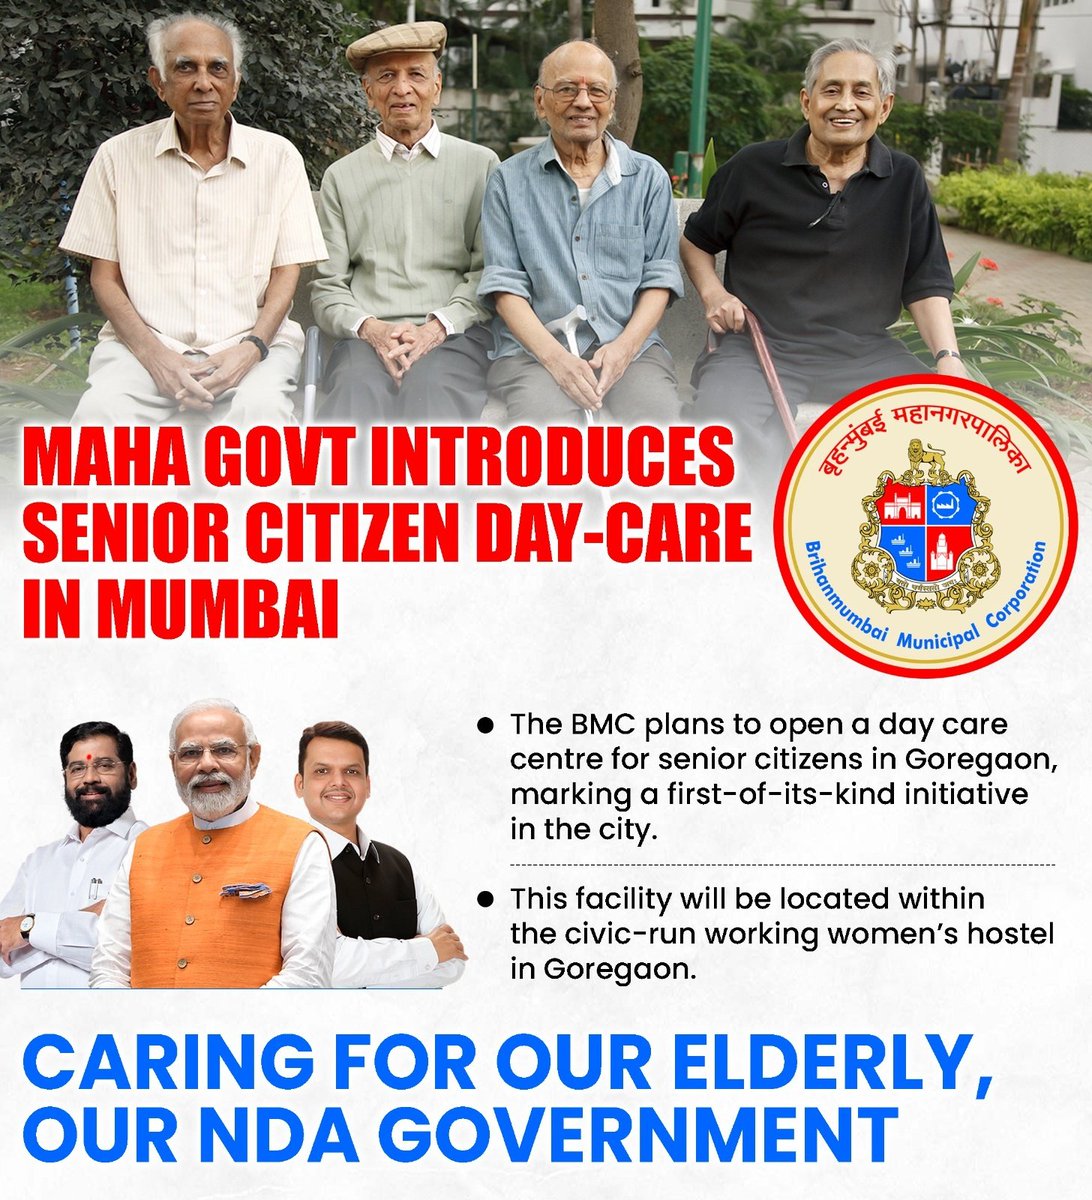 What a wonderful initiative and much needed in today's world! I hope we have more and more of these Senior Citizen Day-Care centres, 'cos many many elderly people really need it the most! ❤️